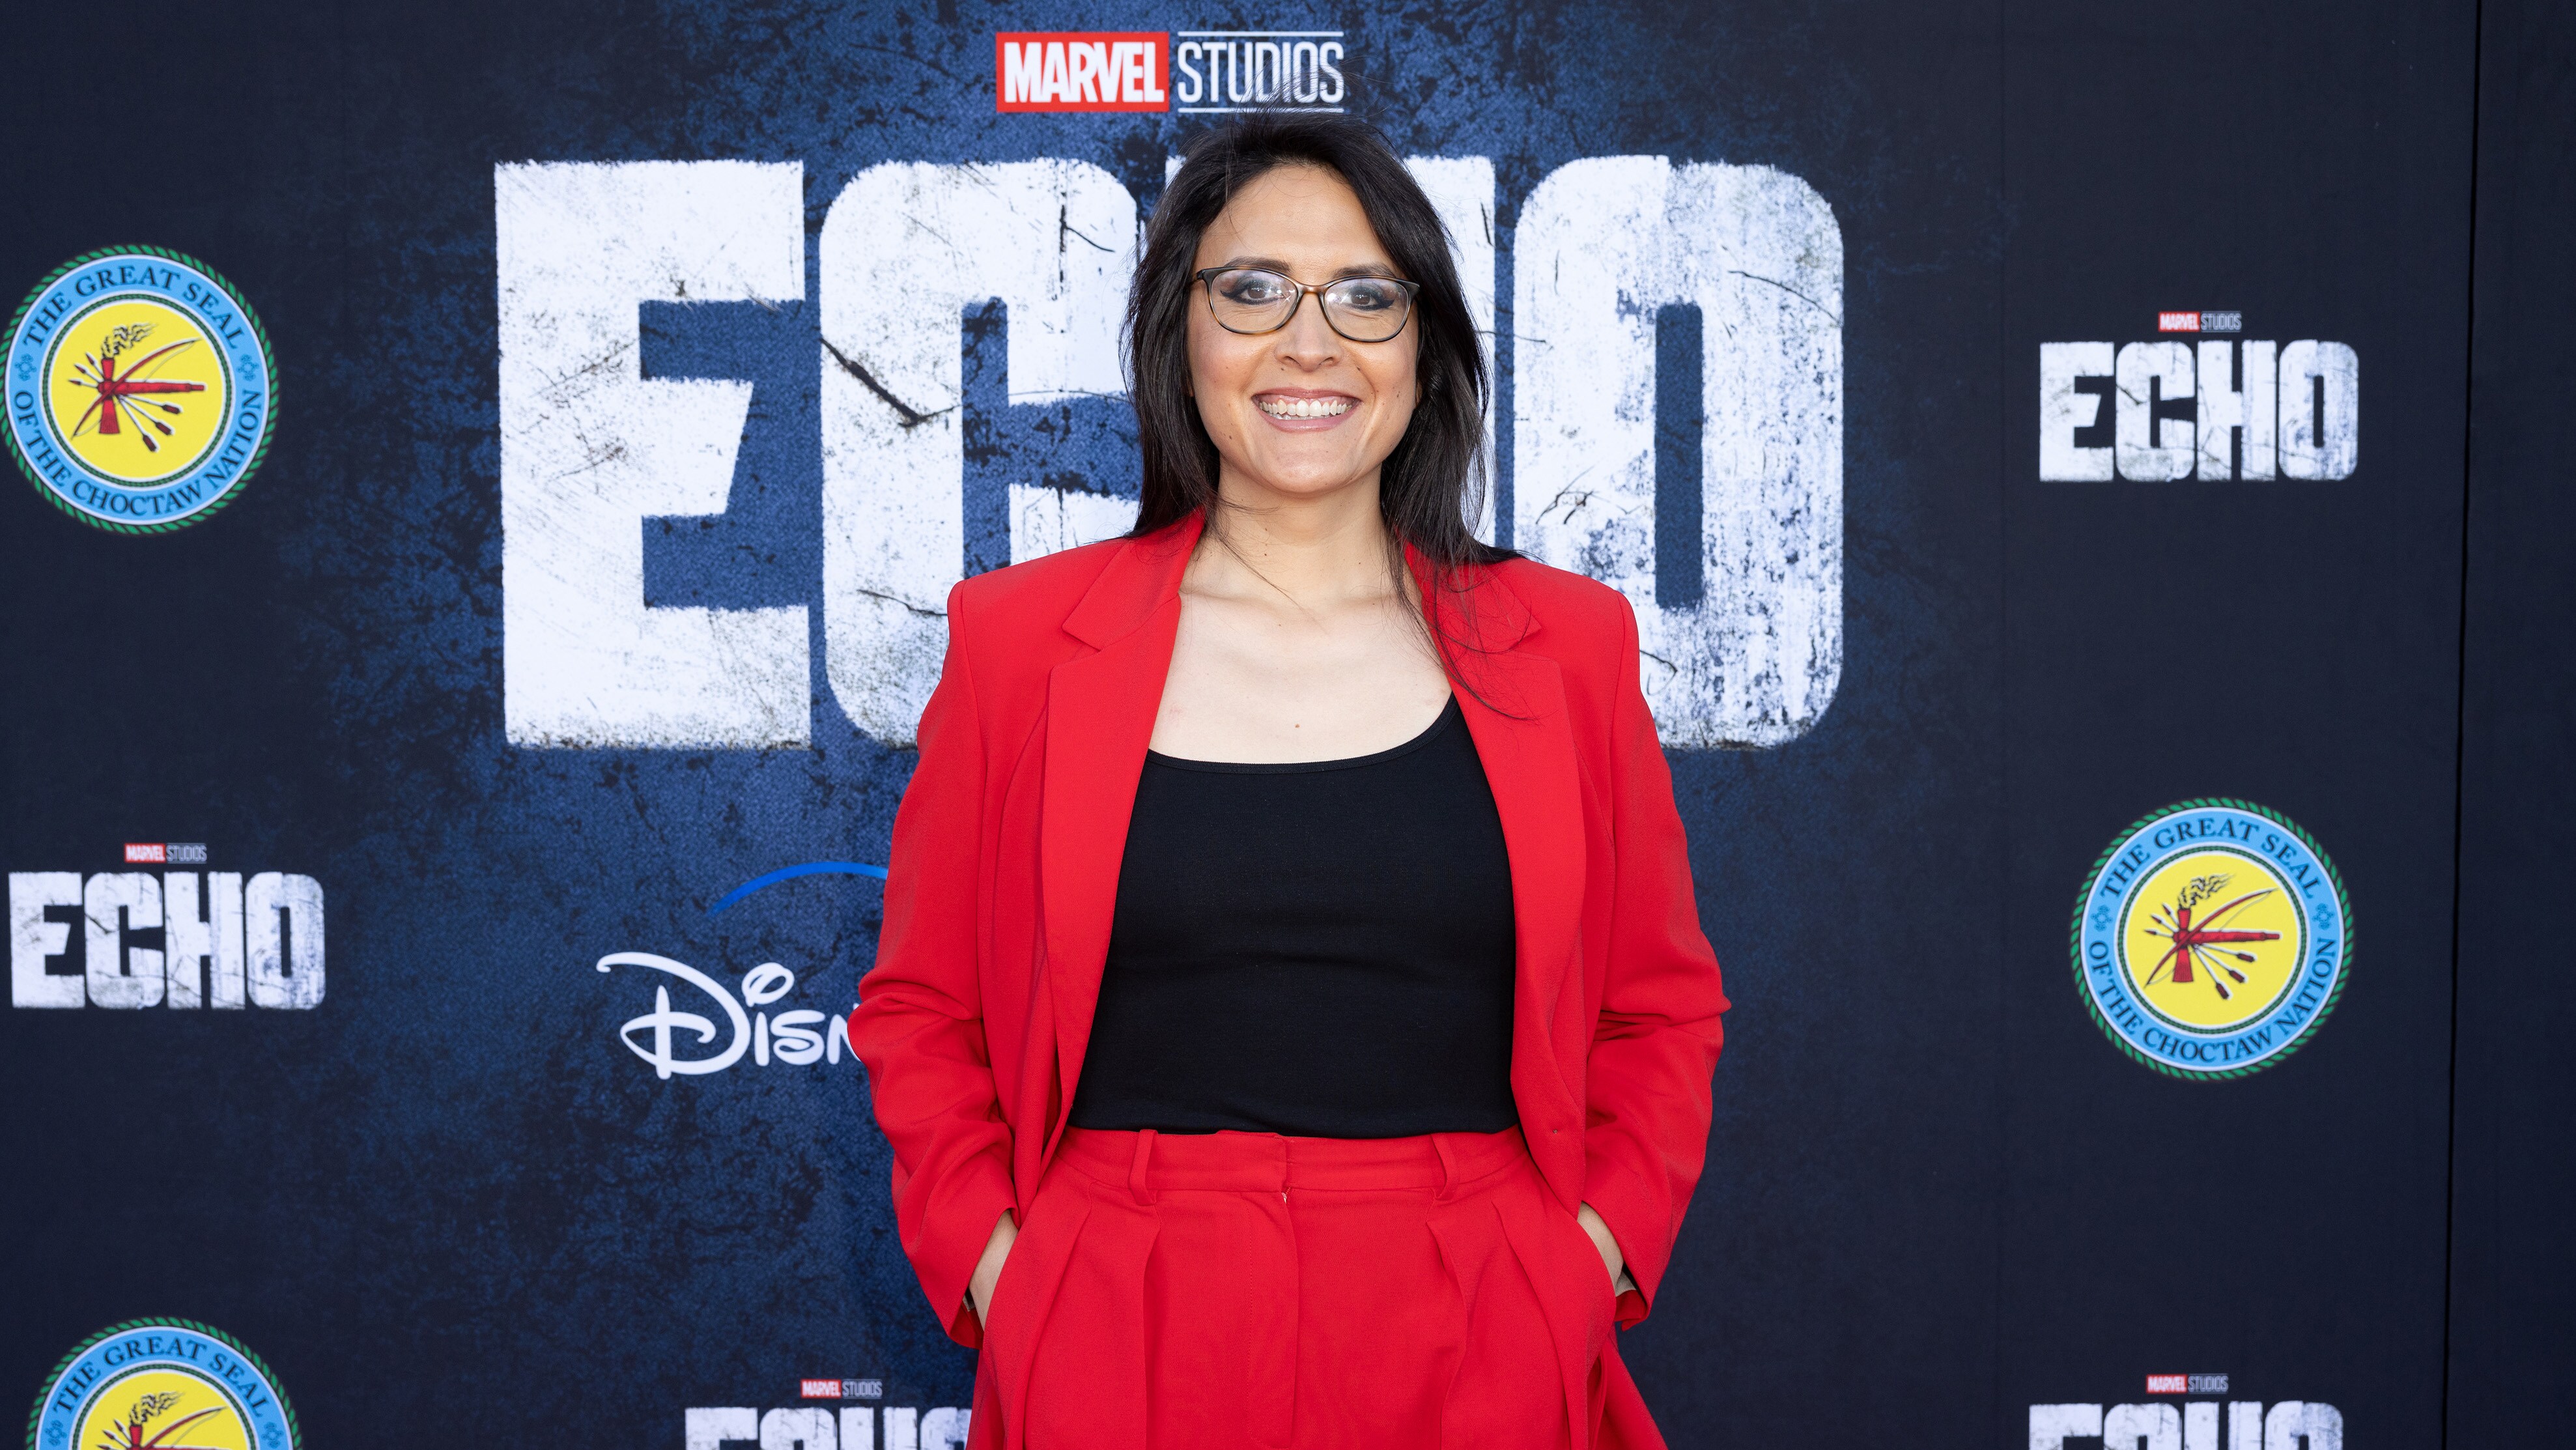 Special Screening Event For Marvel Studios’ “Echo” Celebrates Choctaw Day